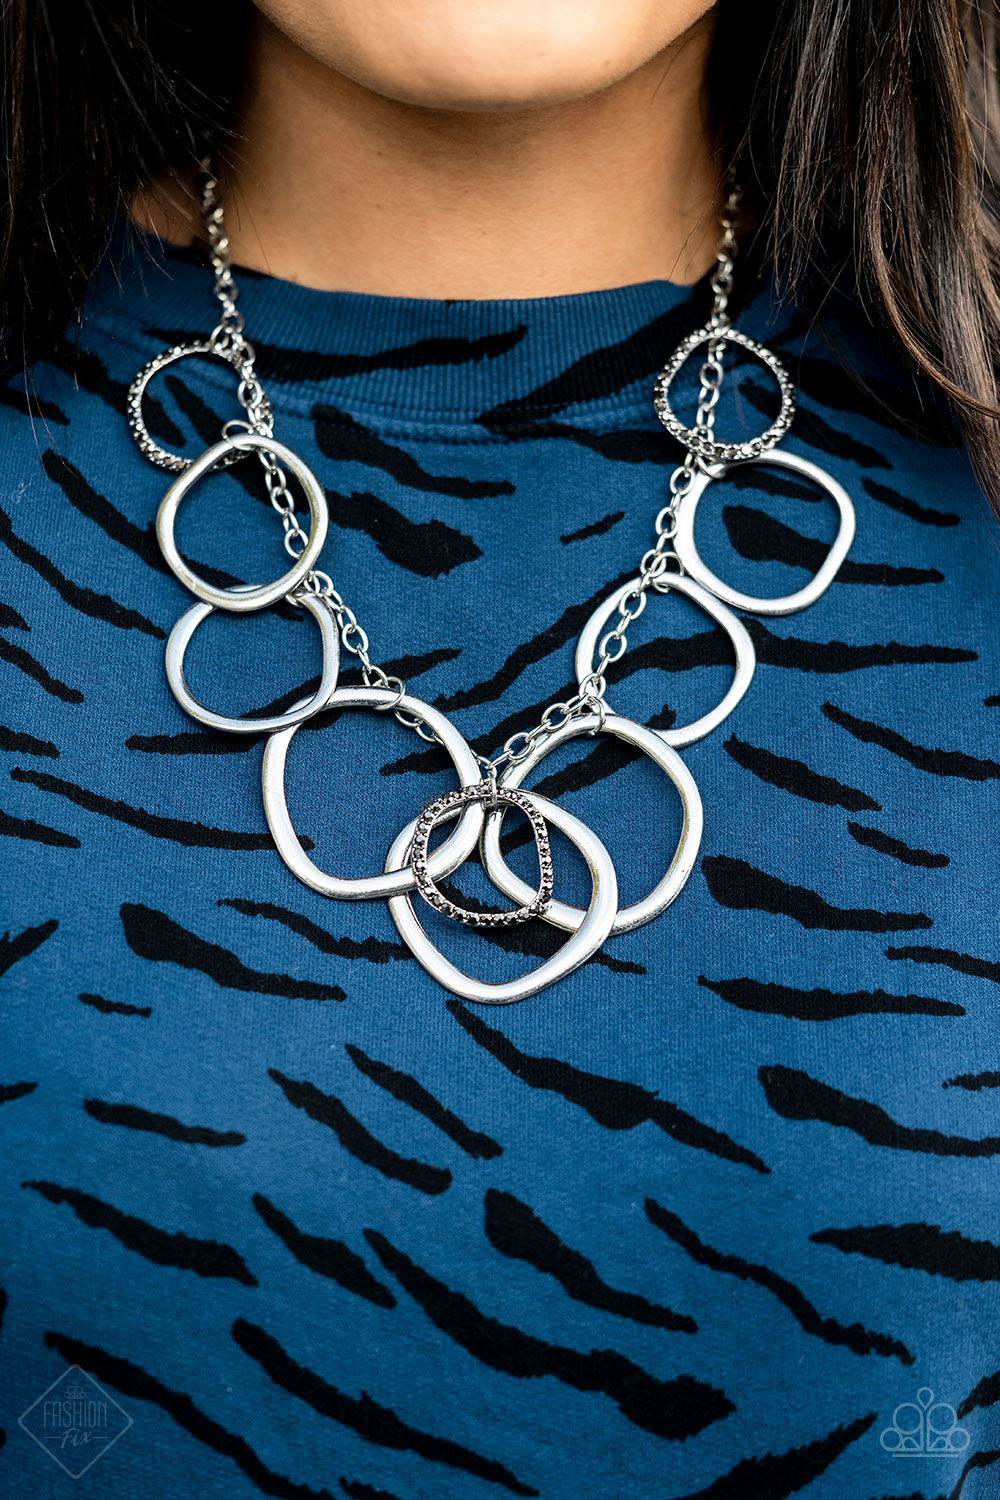 Magnificent Musings - 4 Piece Trend Blend Jewelry Set - Fashion Fix - Paparazzi Accessories - Magnificent Musings Collection set: Dizzy With Desire Necklace, Spinning With Sass Earrings, Hautely Hammered Bracelet, and Scintillating Smolder Ring.